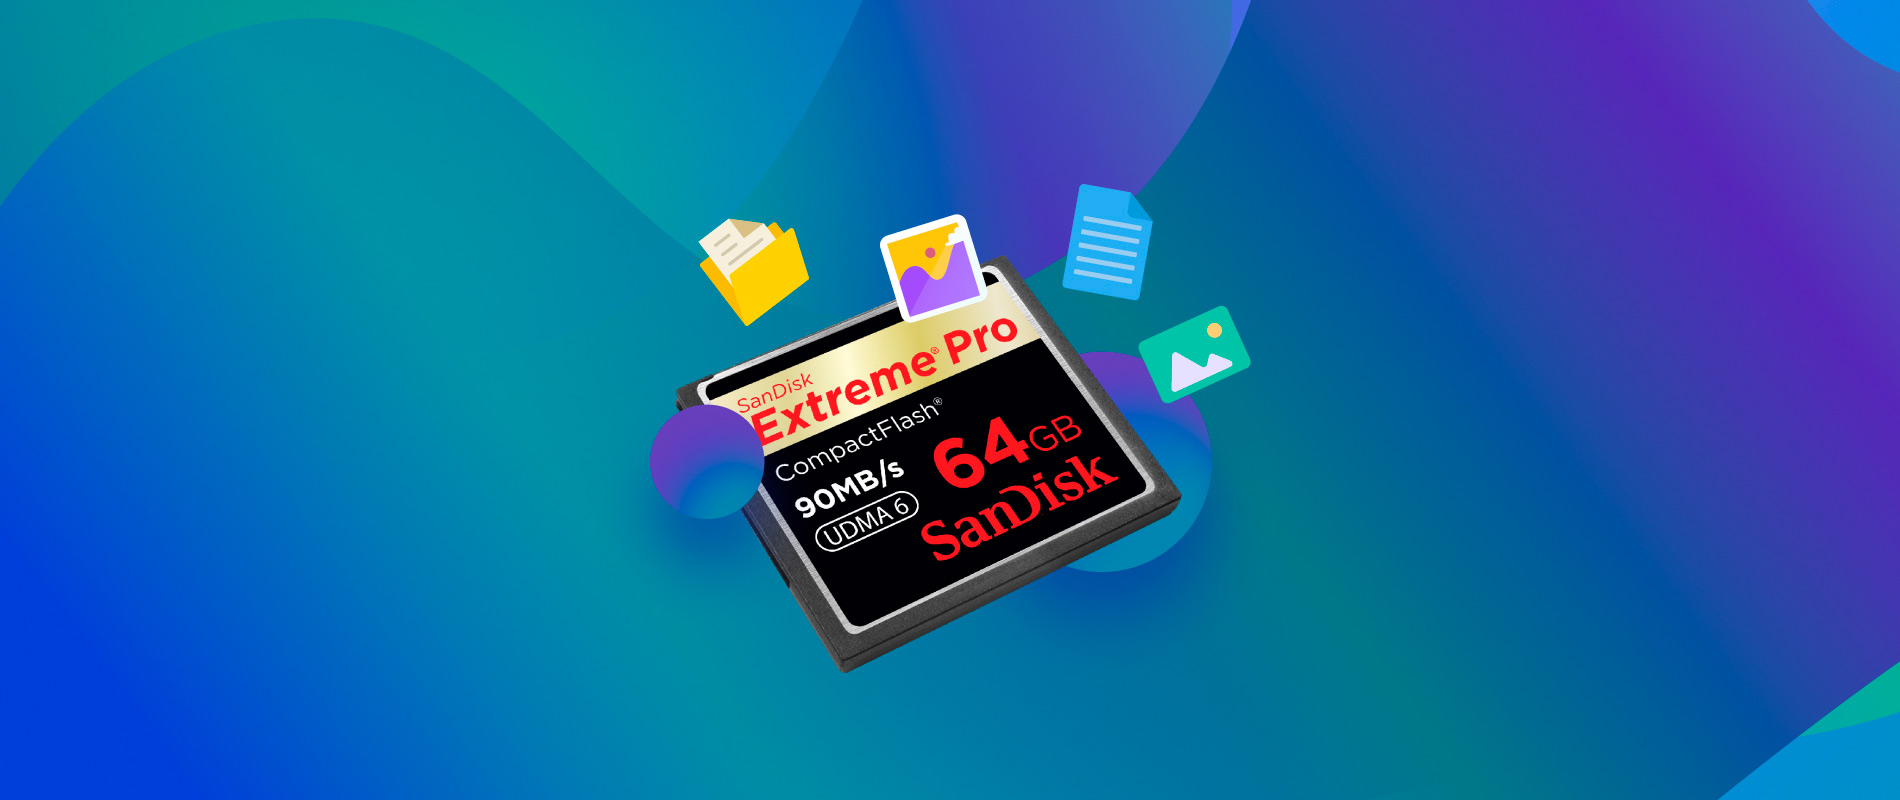 How to Recover Files From a Compact Flash Card for FREE